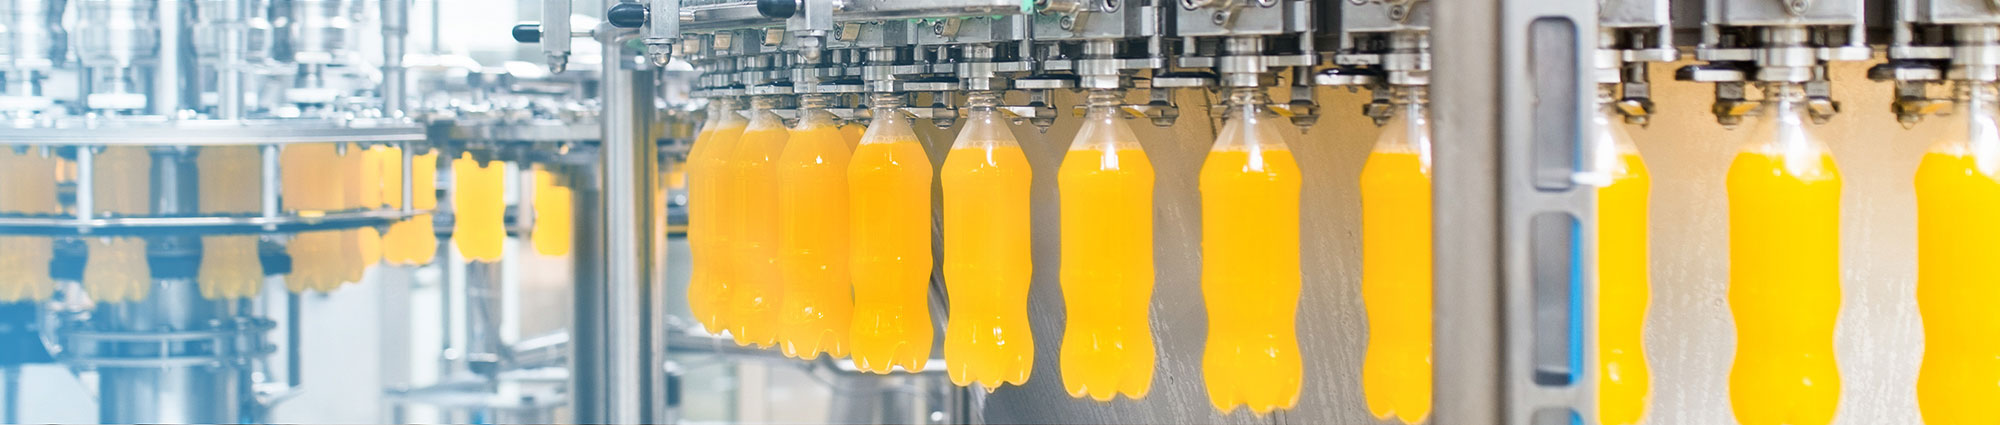 Soft drinks in food and drink factory